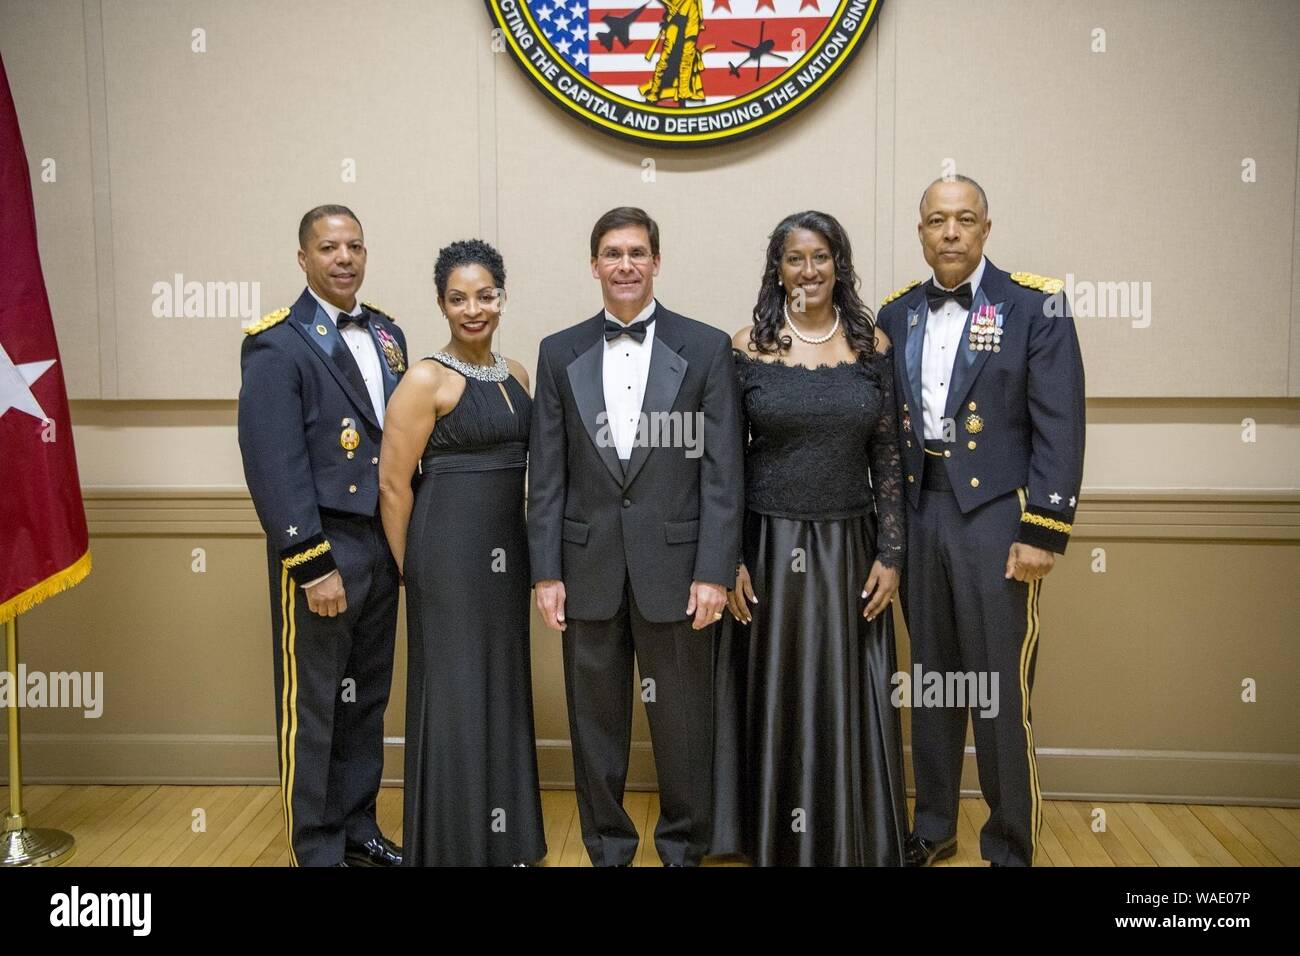 Dr. Mark Esper, Secretary of the Army, with Maj. Gen. William J. Walker and Brig. Gen. Aaron R. Dean II, with their wives. Stock Photo